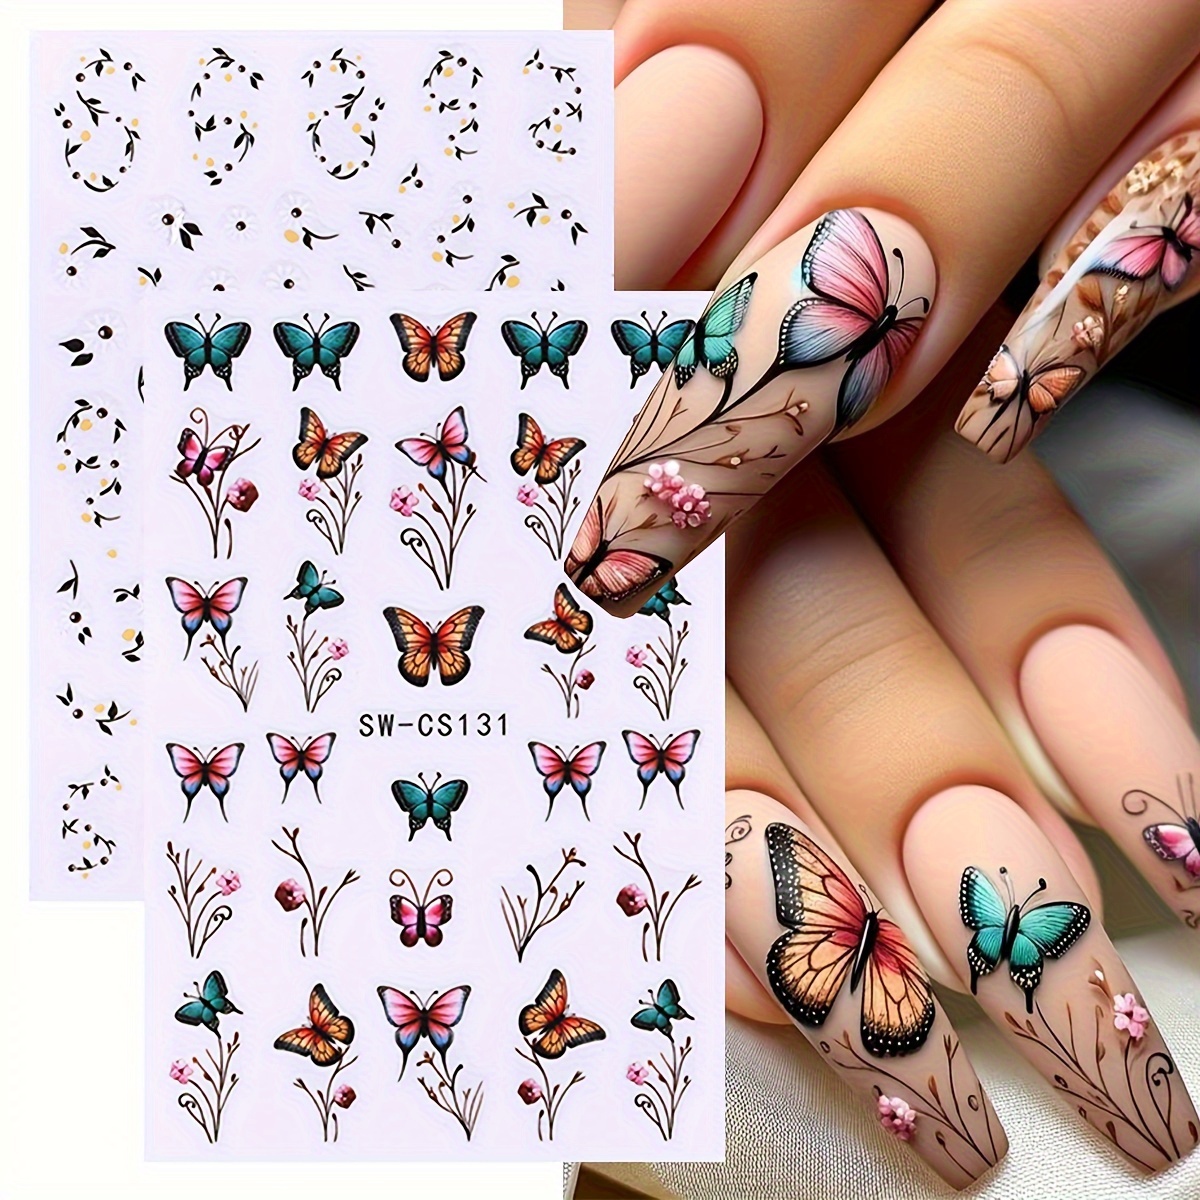 

2pcs 3d Flowers Nail Art Stickers Butterfly Lavender Flowers Design Nail Decal Design Charms Blossom Spring Sticker Diy Manicure Decoration